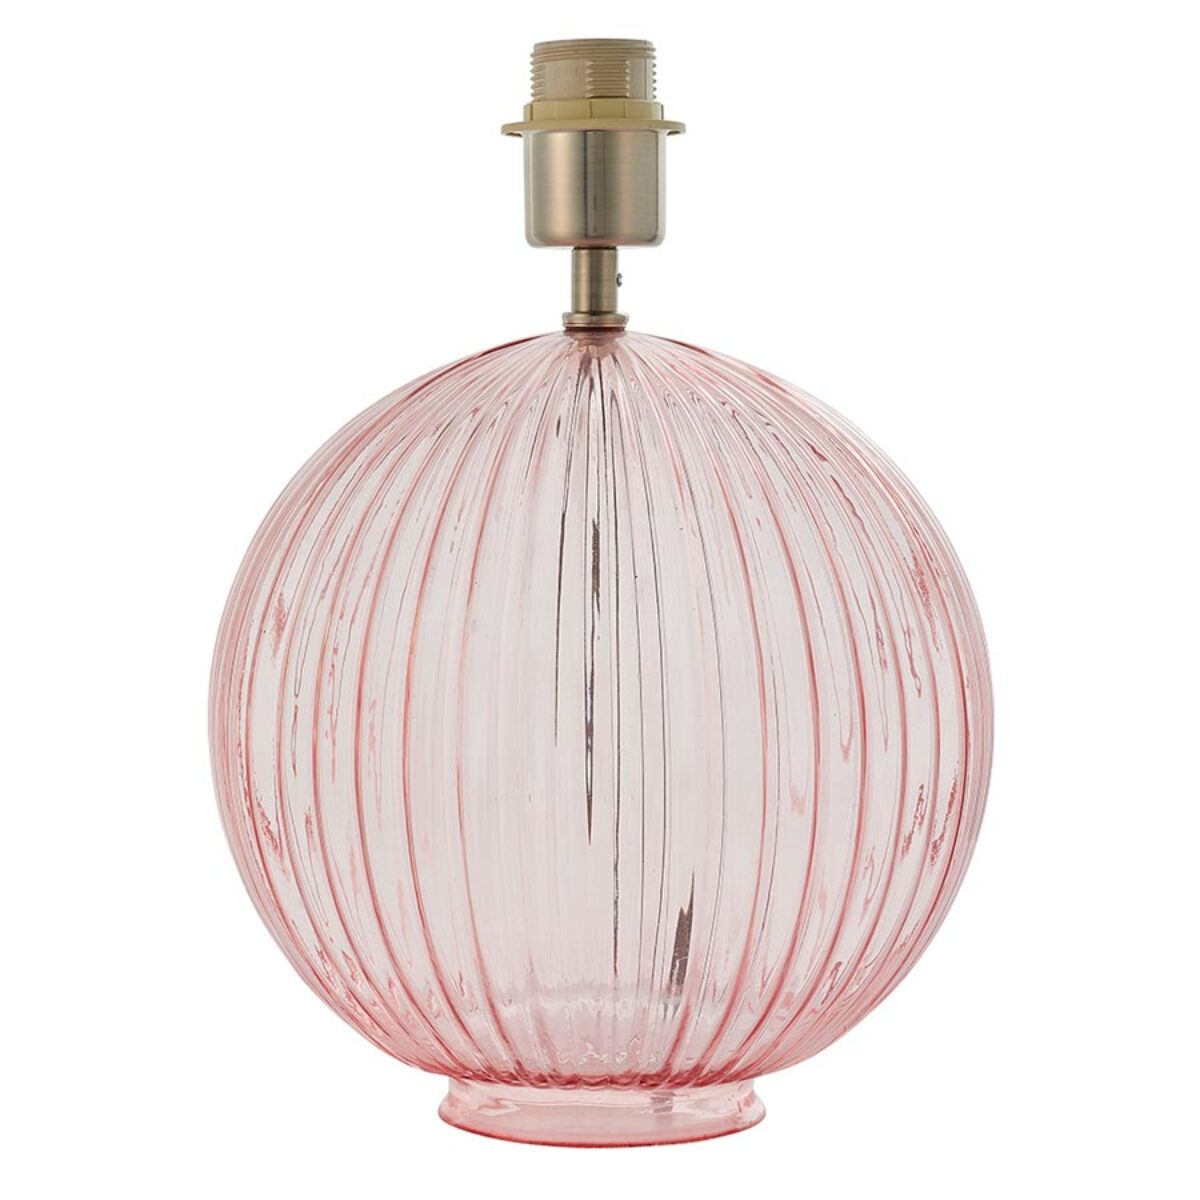 Endon Jemma 1 Light Pink Ribbed Glass, Pink Glass Table Lamp Shade